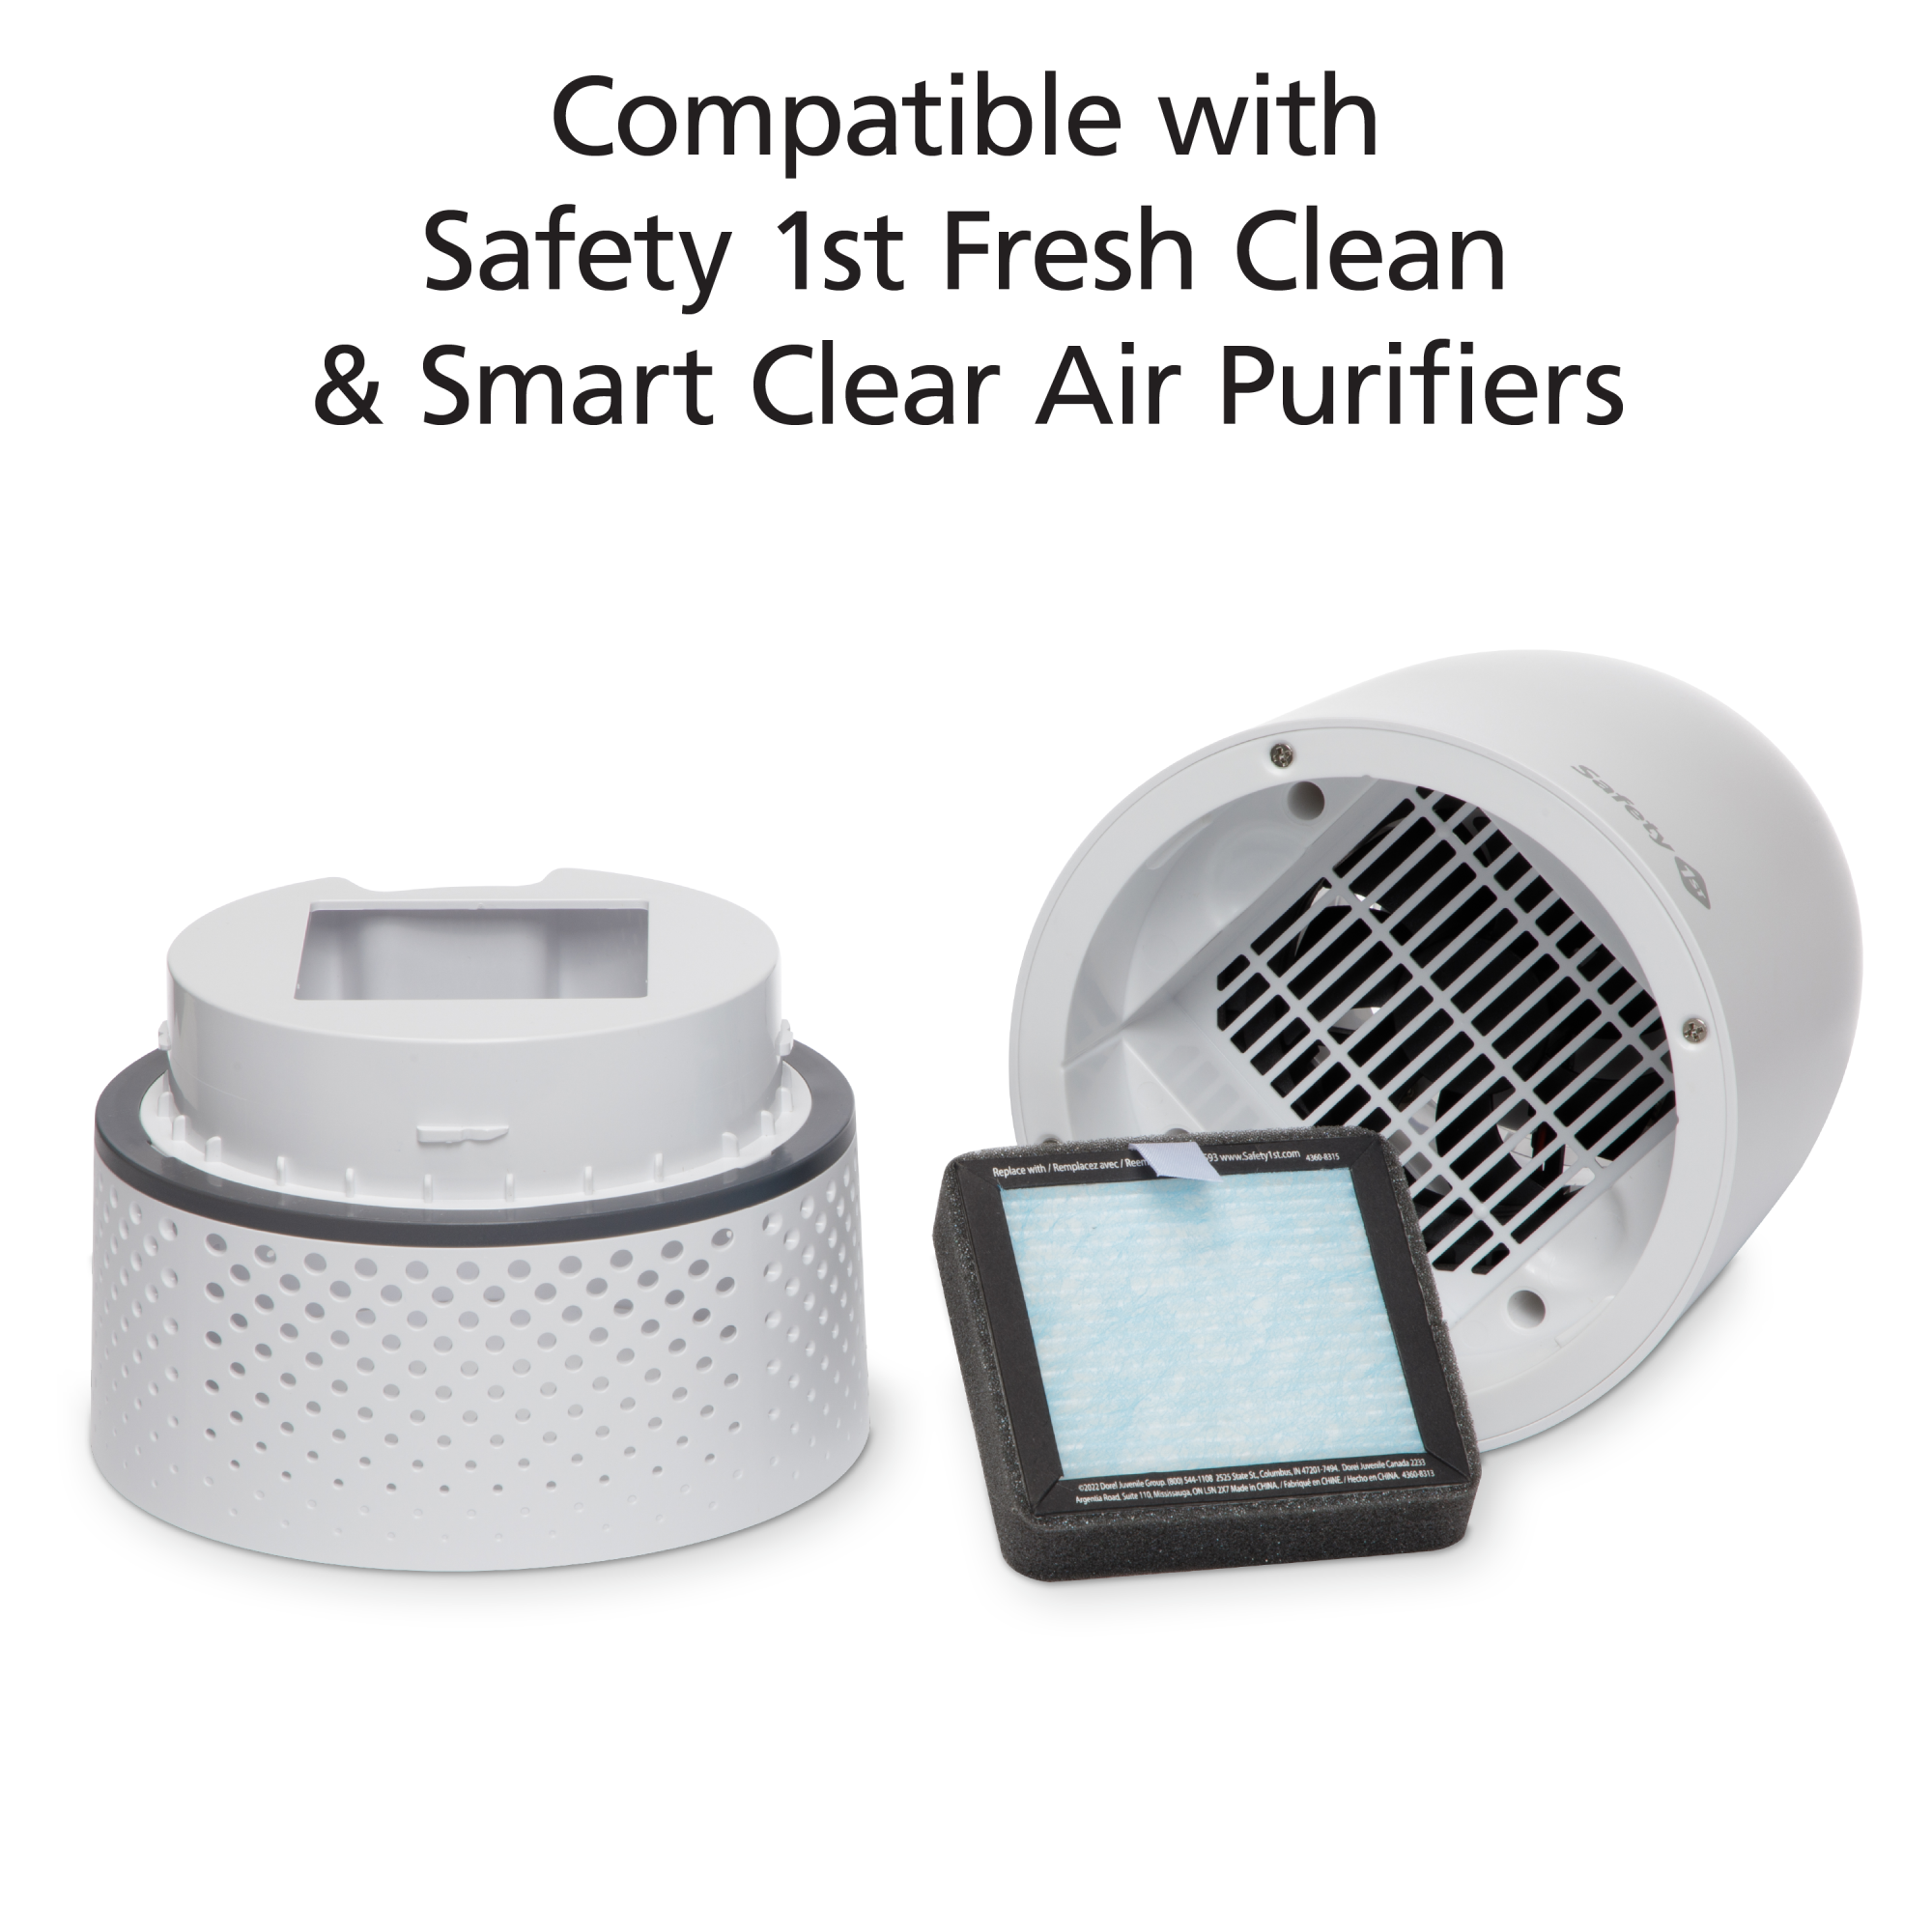 True HEPA Air Purifier Replacement Filter - compatible with Safety 1st fresh clean & smart clear air purifiers